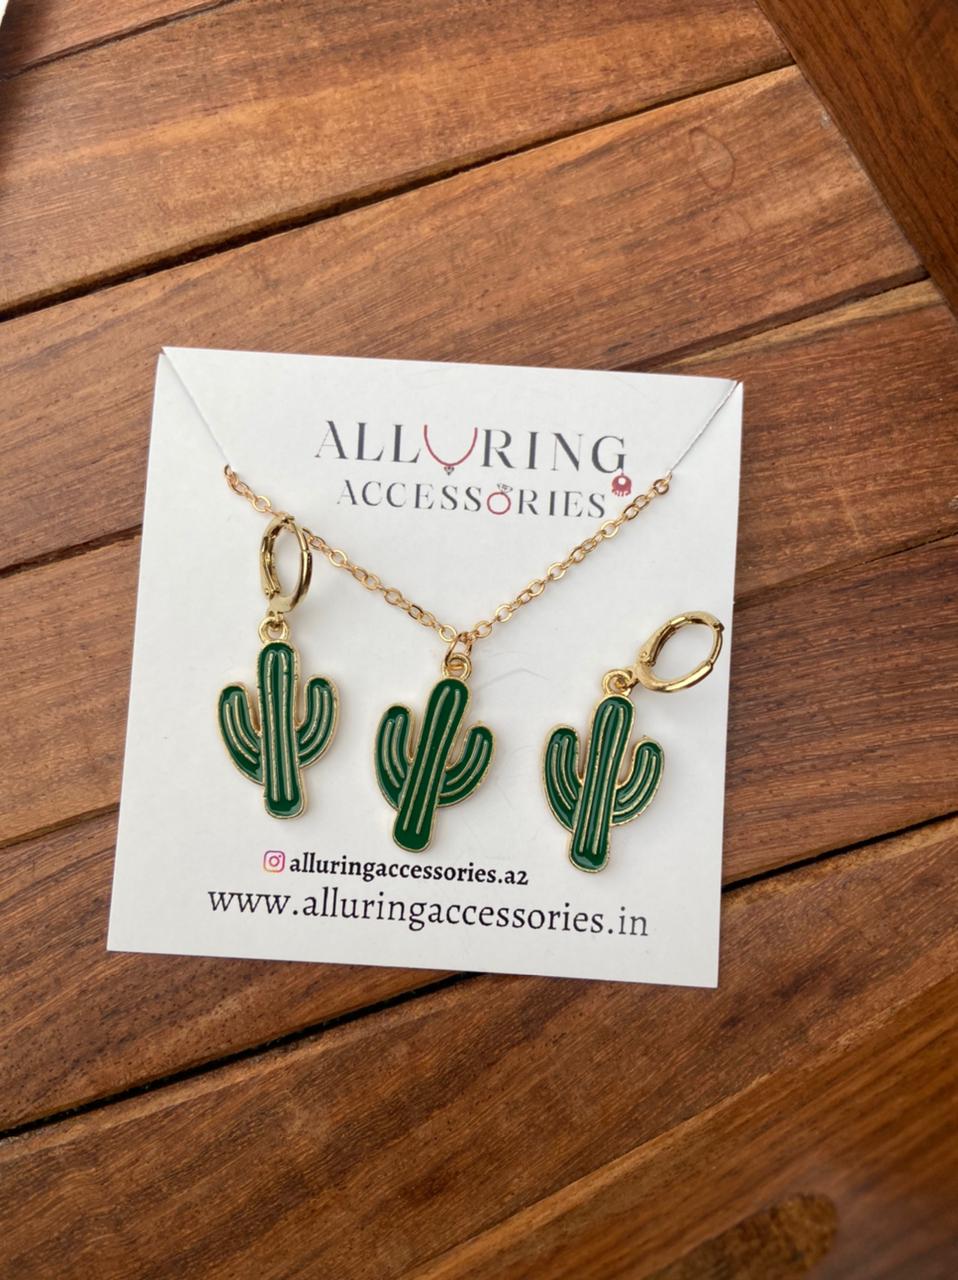 Cactus Neckline with matching earrings - Alluring Accessories